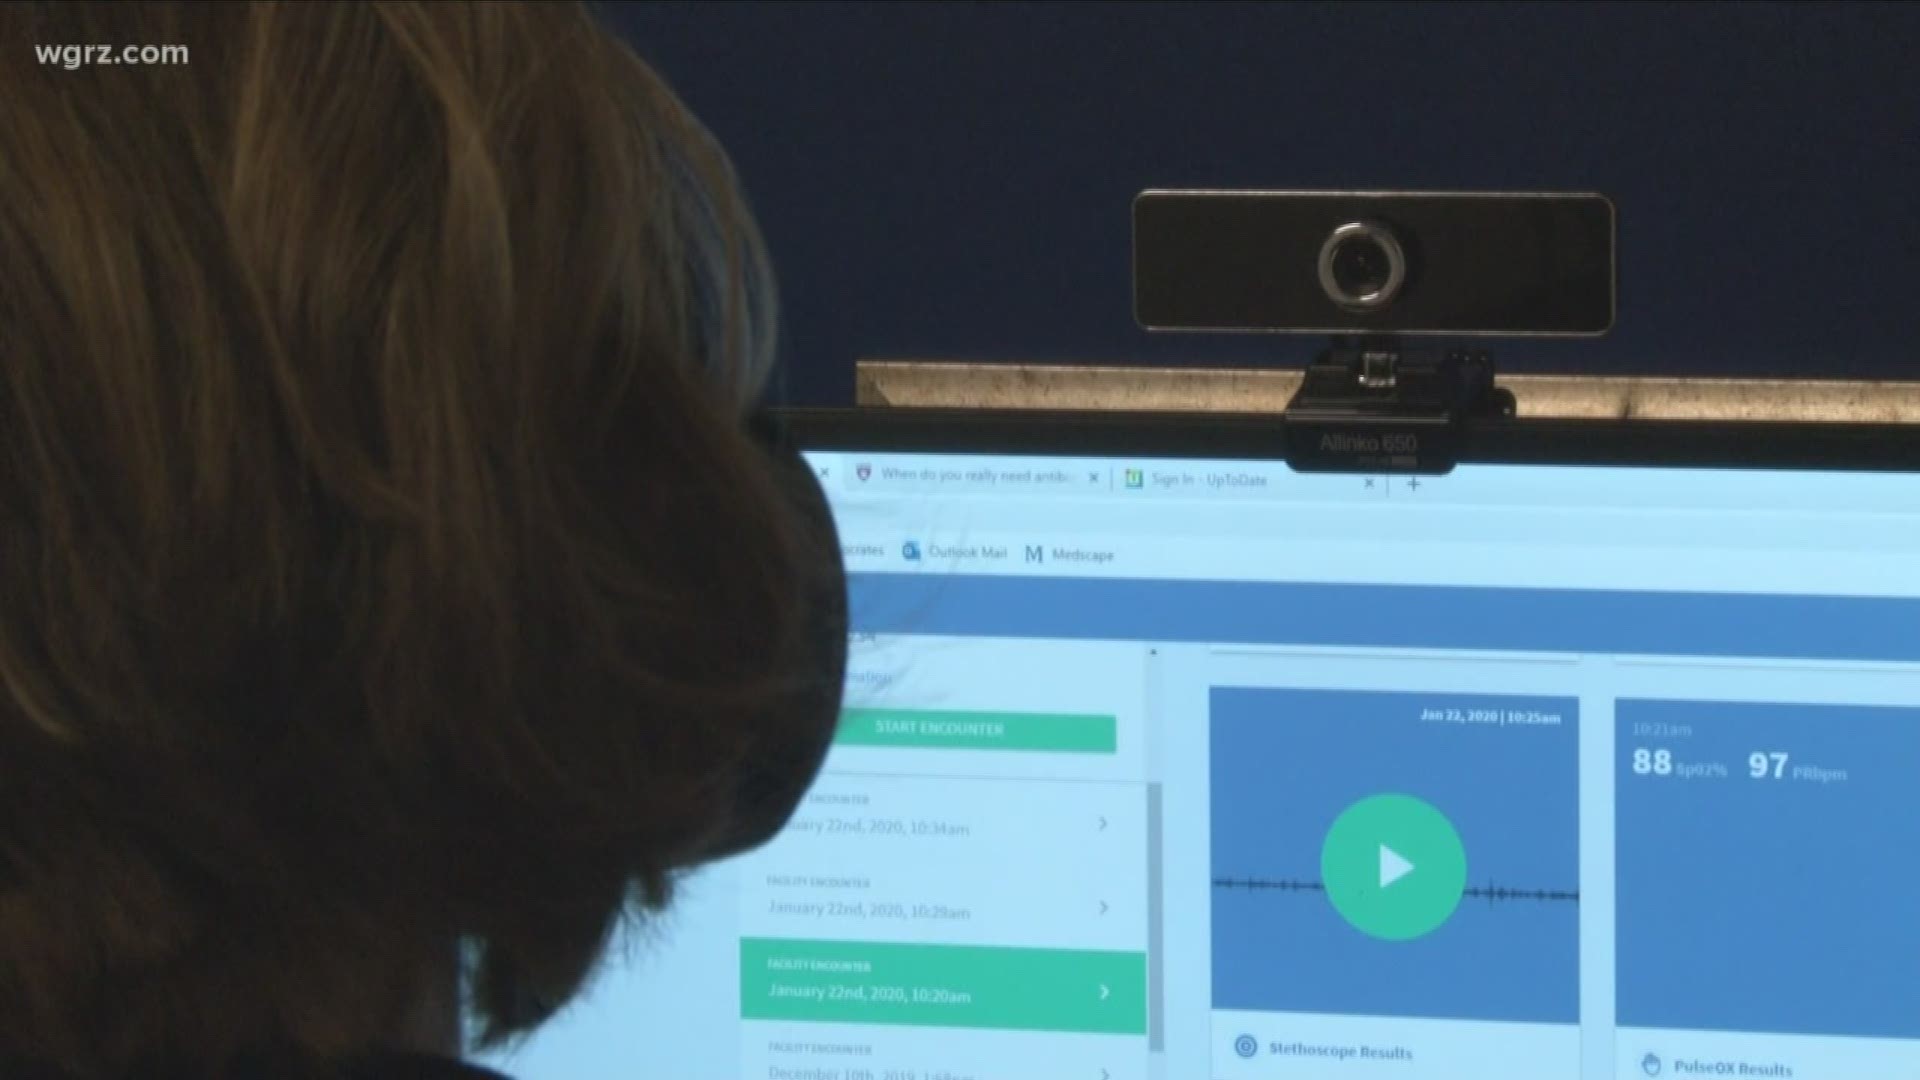 Buffalo's Mobile Telemed has seen a more than 20 percent increase in telemedicine calls over the past several weeks.